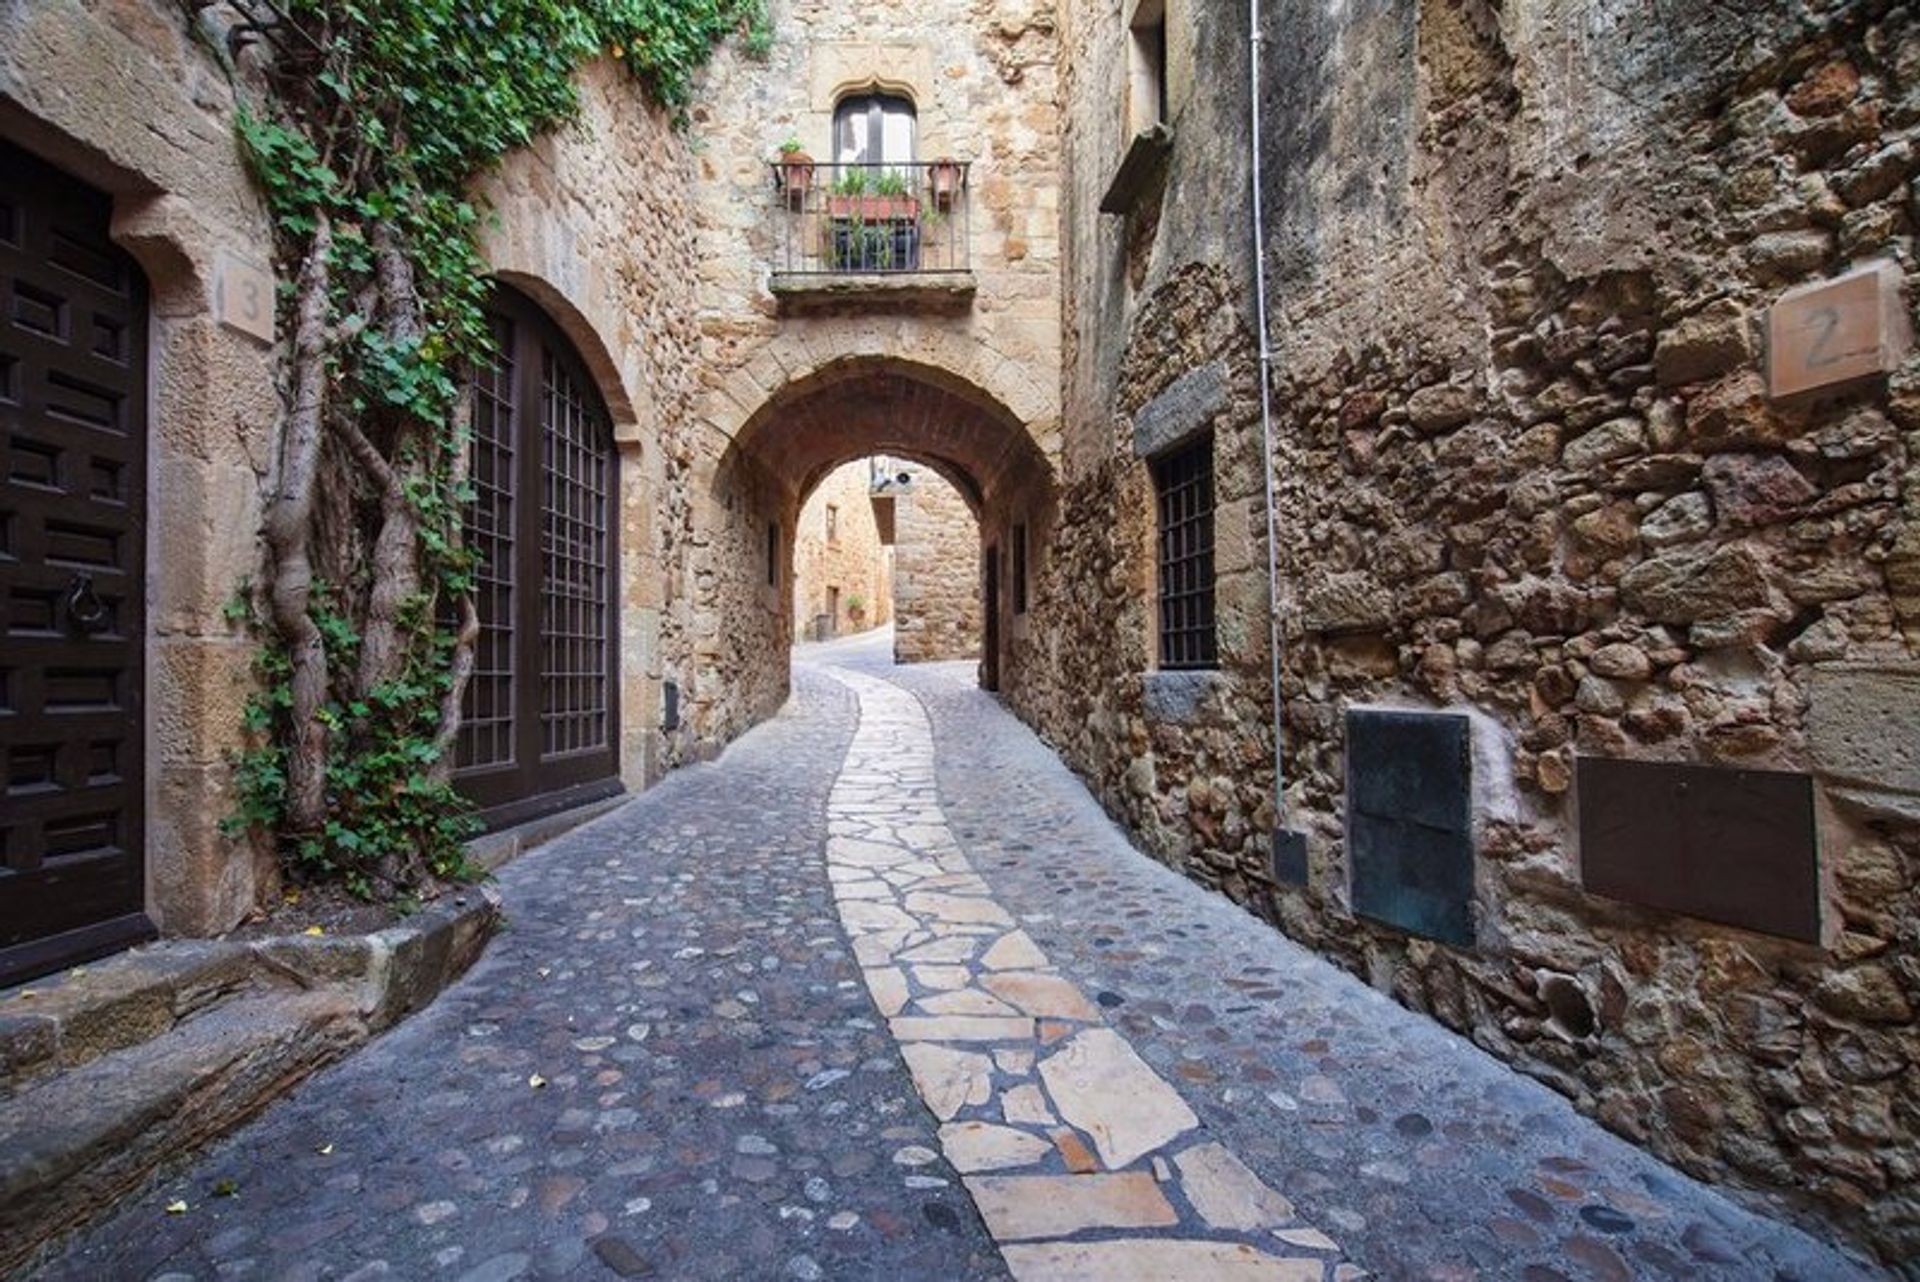 Passageway in the Old Town in Pals, Girona - Costa Brava